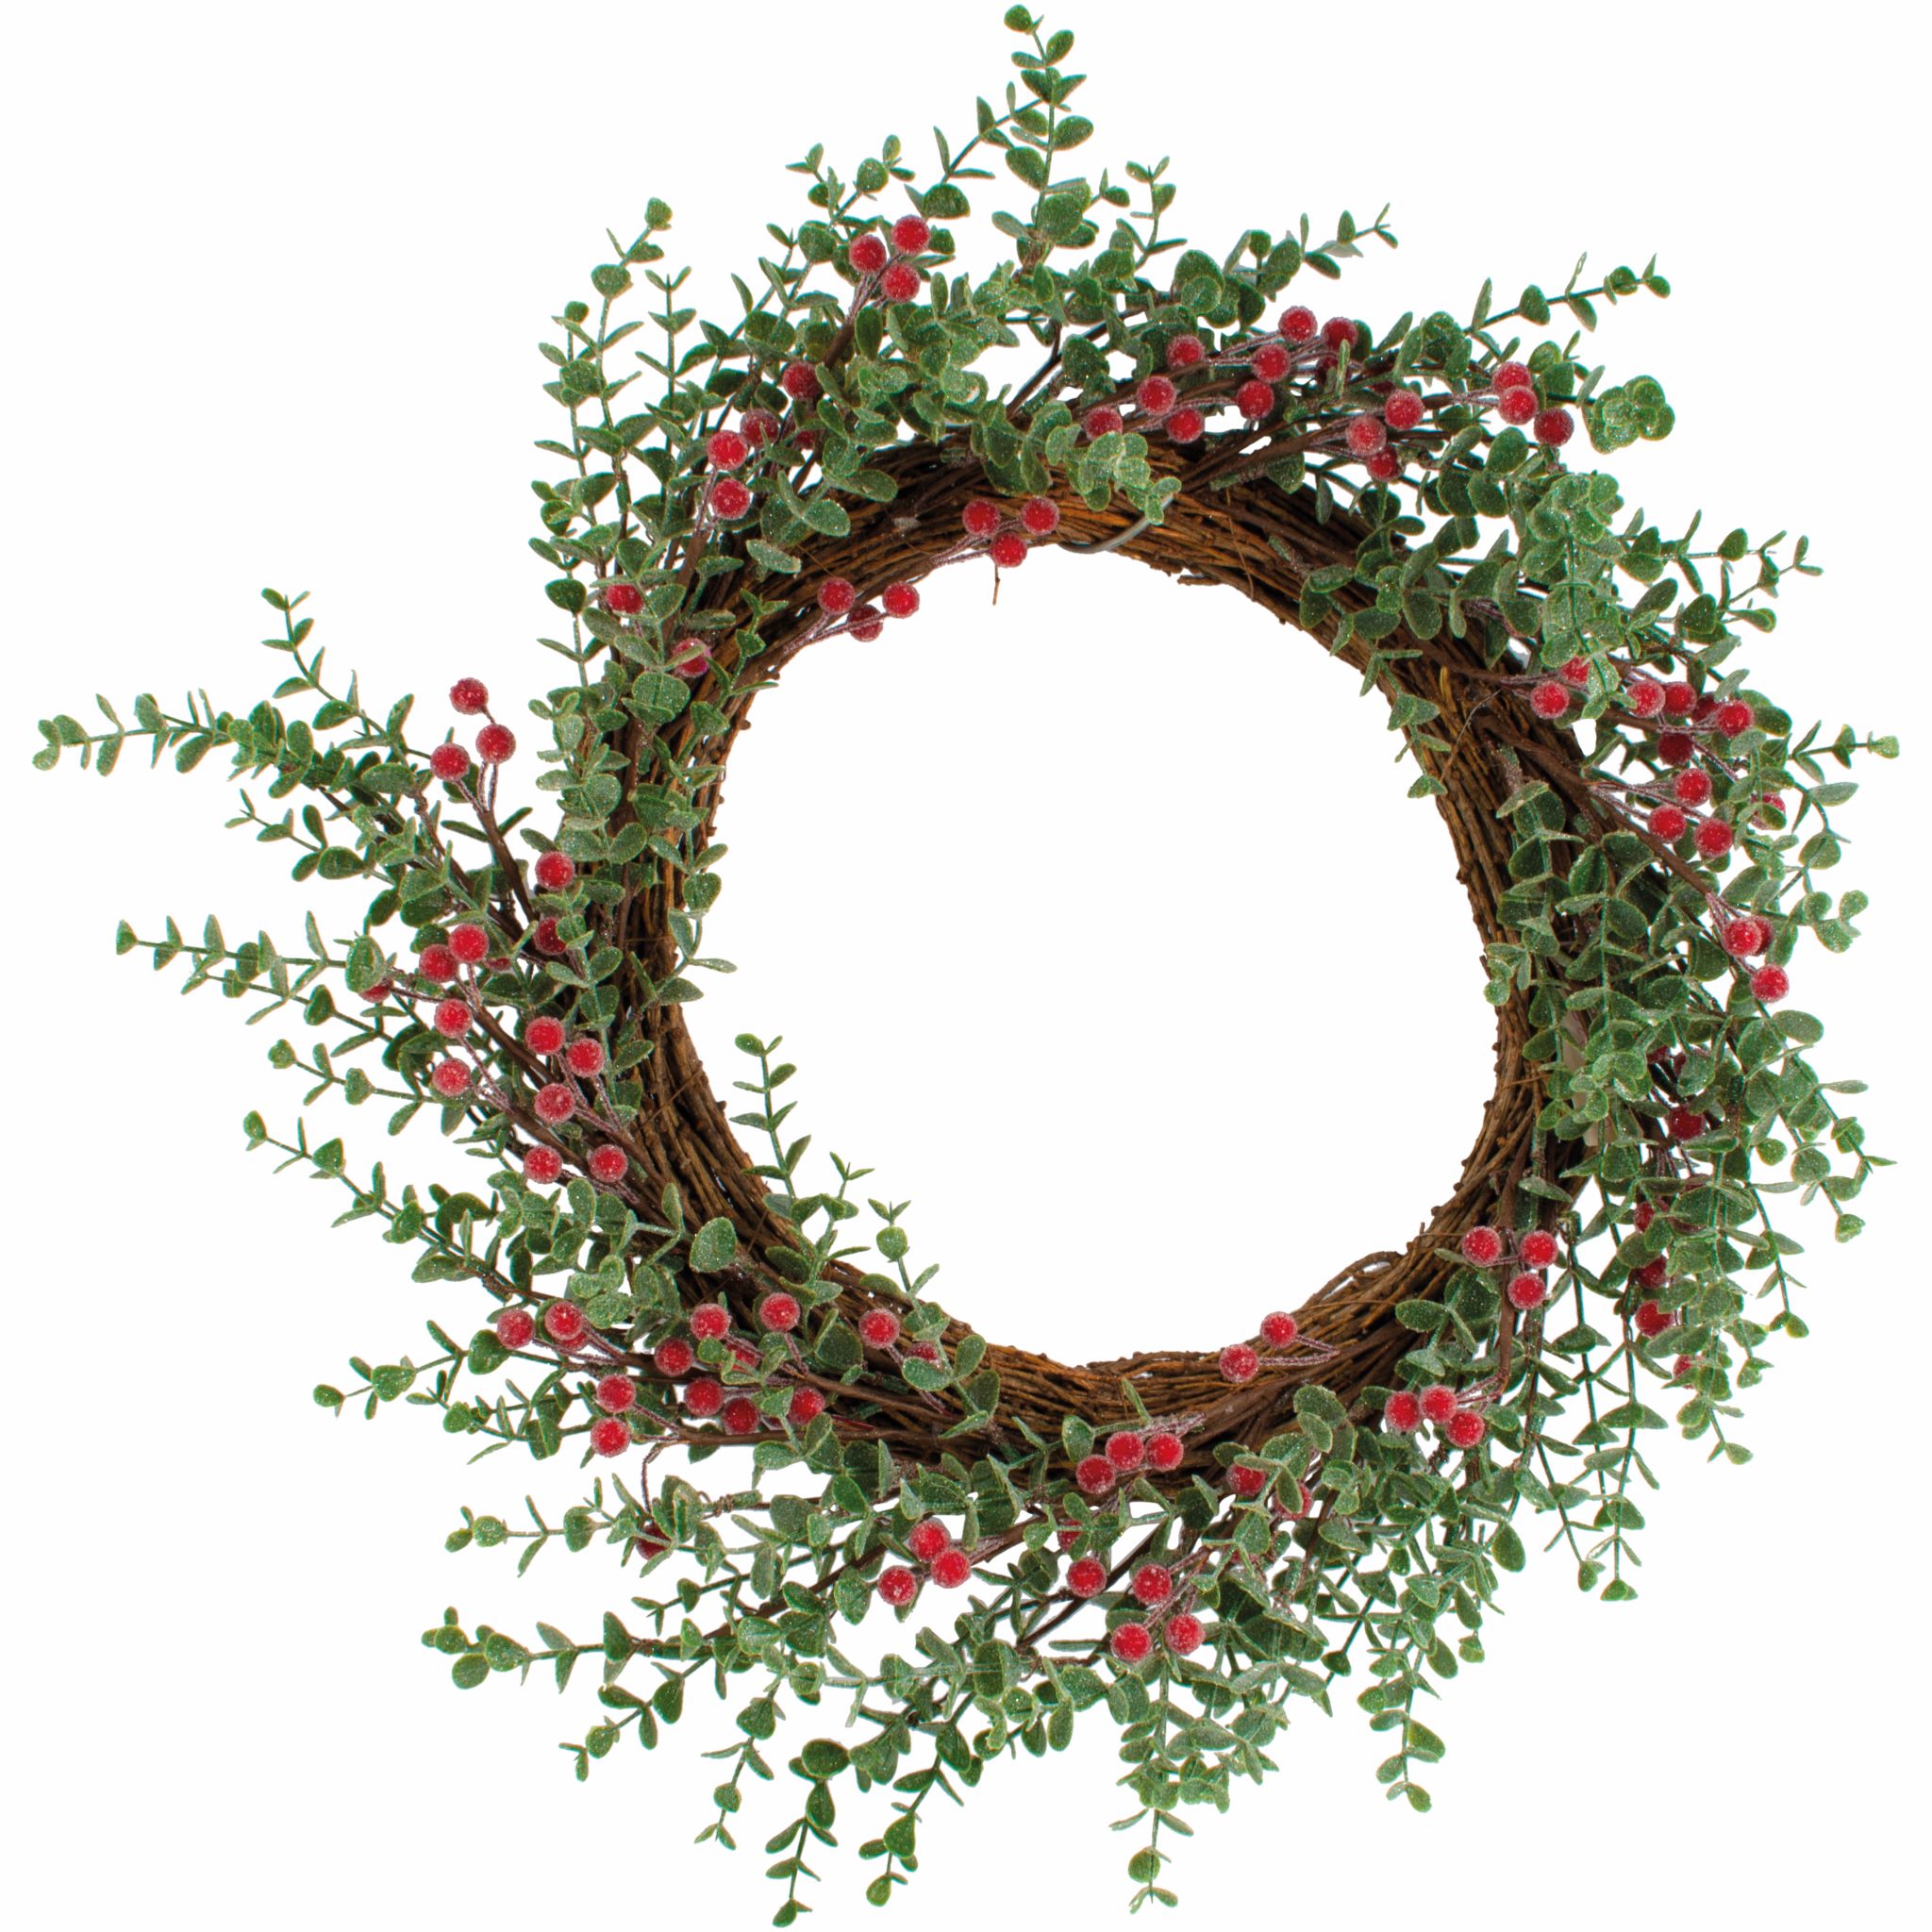 Grand Illusions Frosted Winter Berry Wreath 